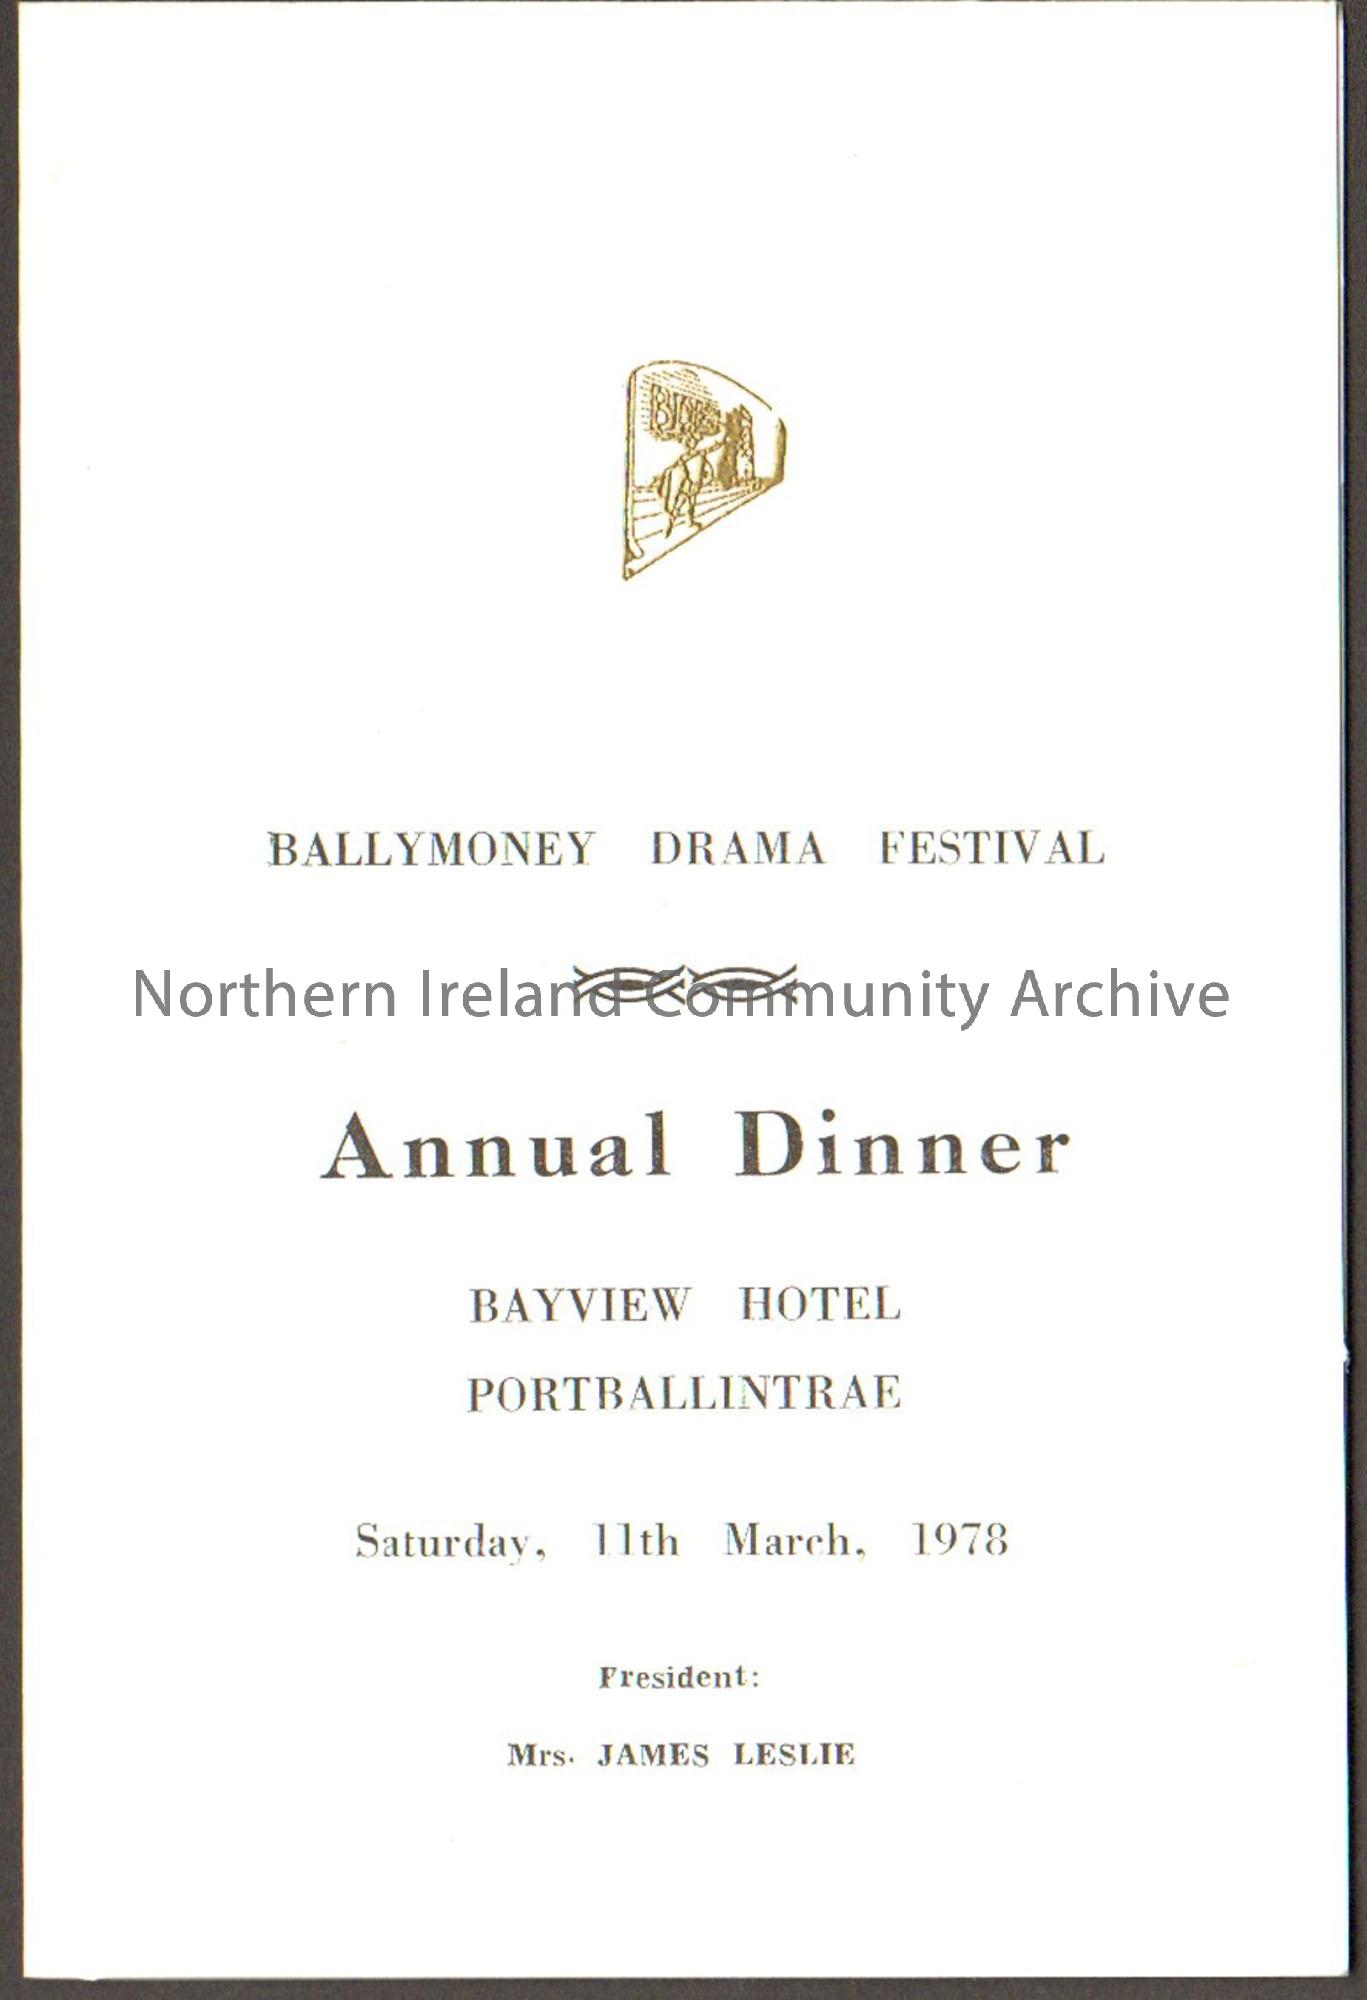 Menu for the annual dinner of Ballymoney Drama Festival held at Bayview Hotel, Portballintrae on 11th March 1978. White folded piece of cardboard with…